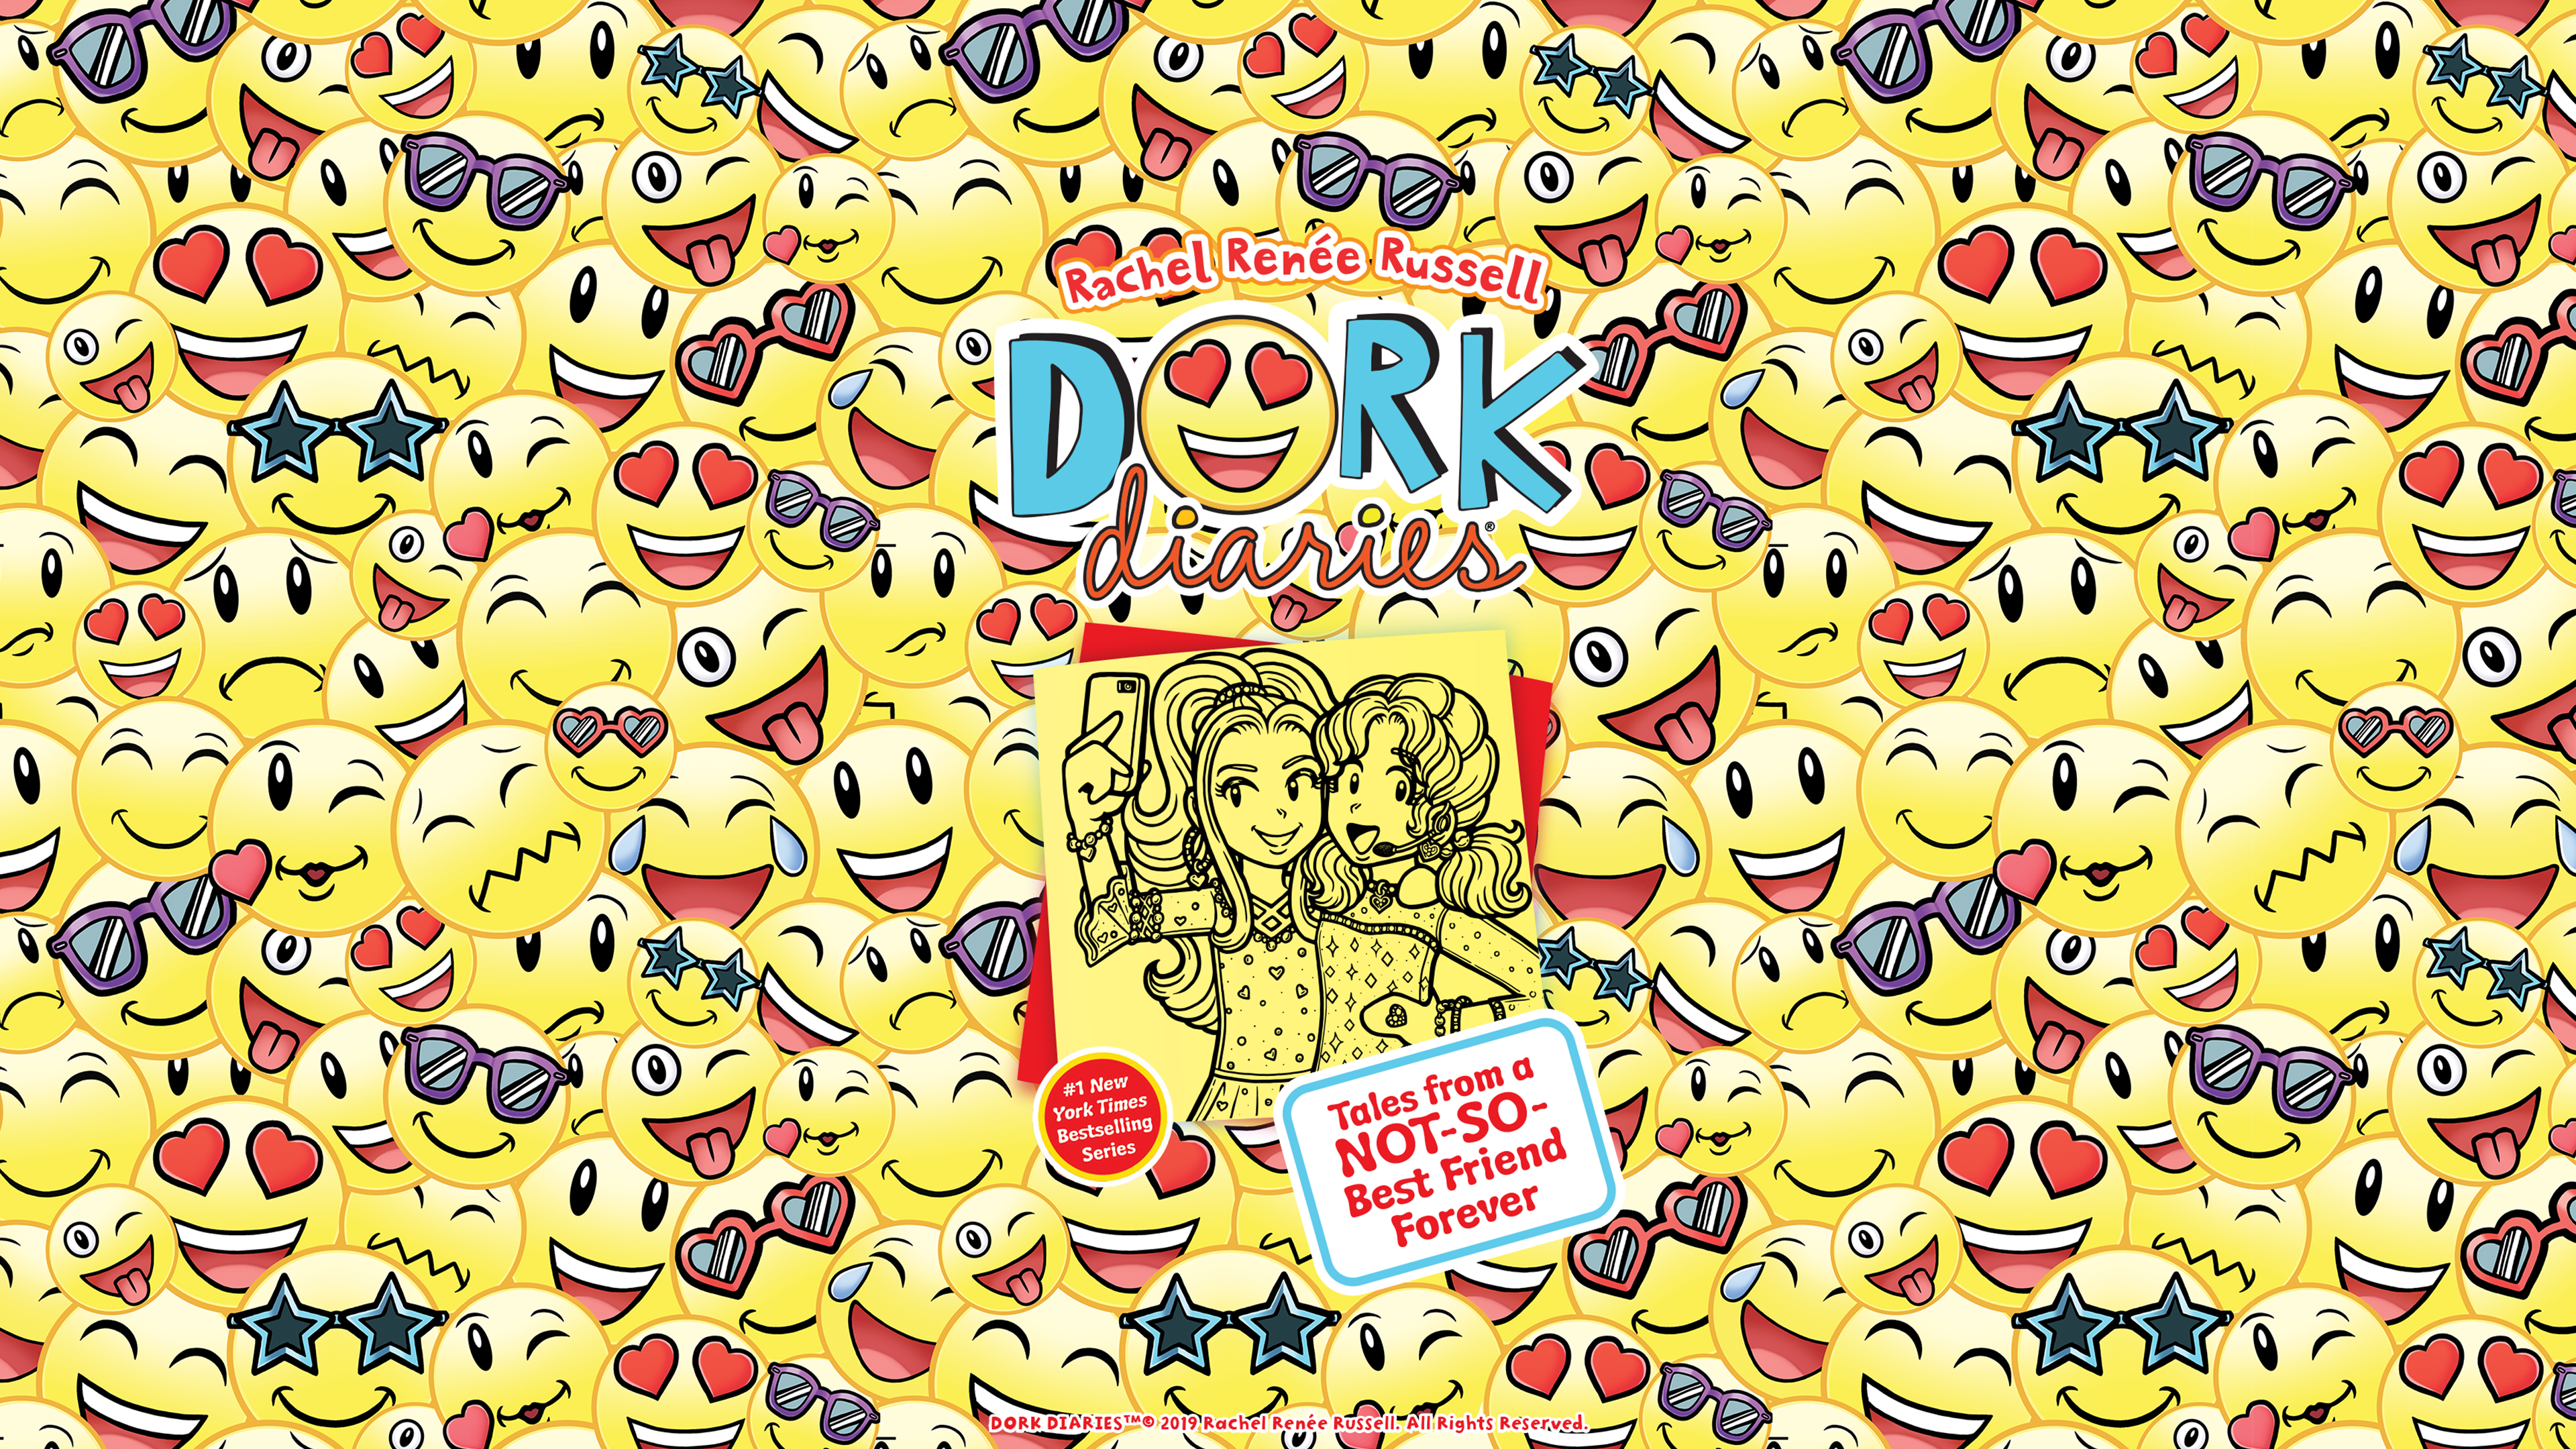 Tales from a Not-So-Best Friends Forever – Wallpaper – Dork Diaries